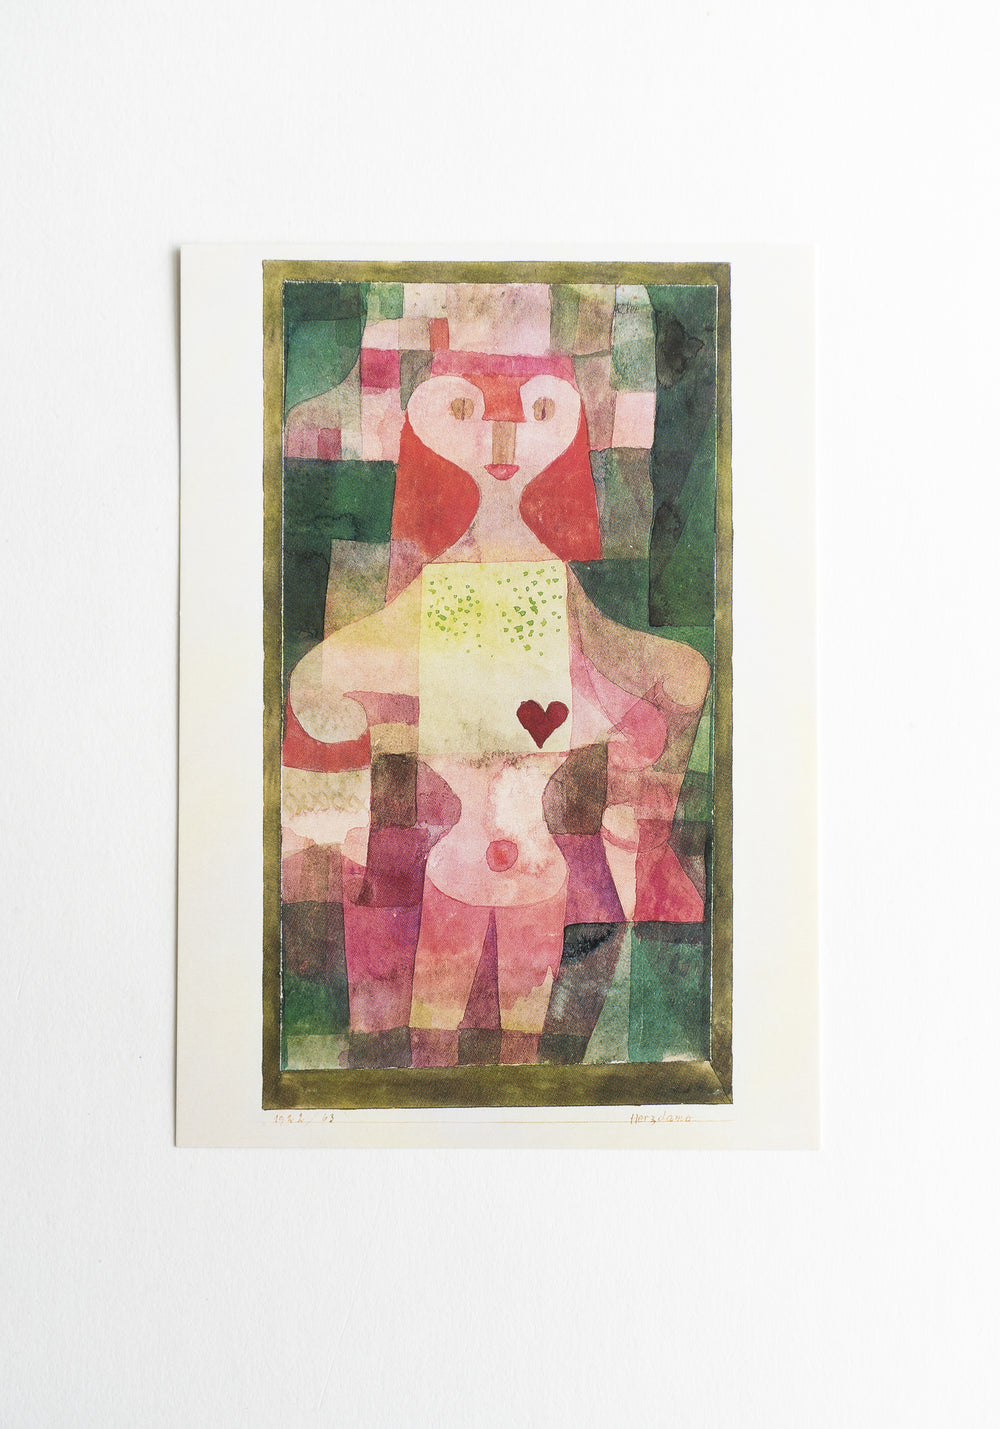 Queen of Hearts Postcard by Paul Klee